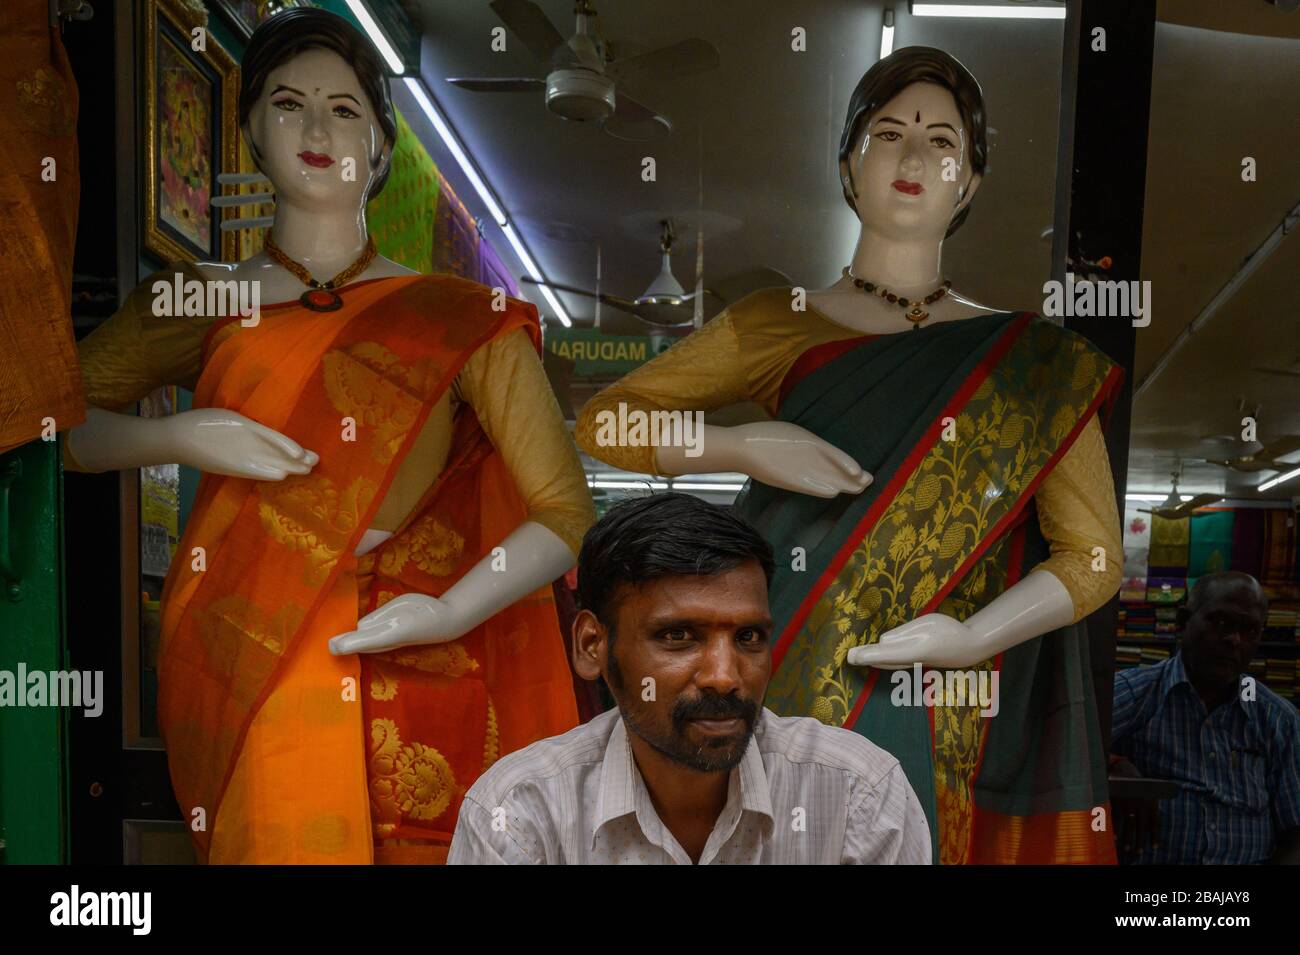 Portrait of a man under two mannequins in a shop window, Madurai, India Stock Photo